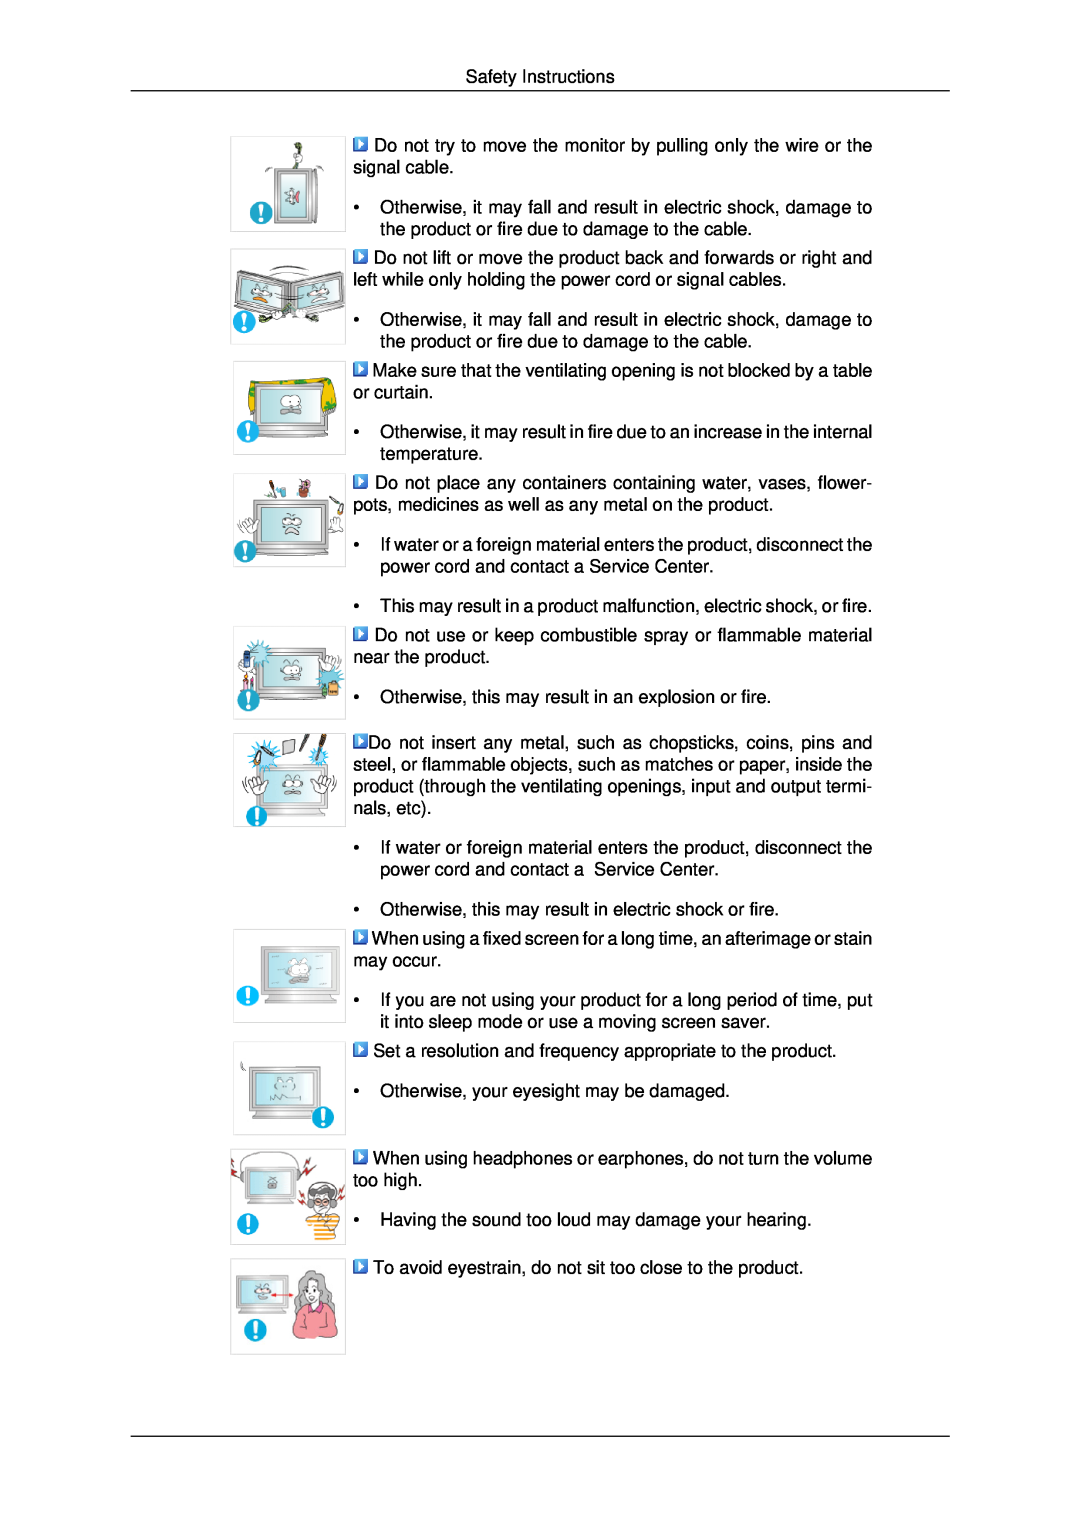 Samsung LH82BVTMBF/XY manual Safety Instructions, This may result in a product malfunction, electric shock, or fire 